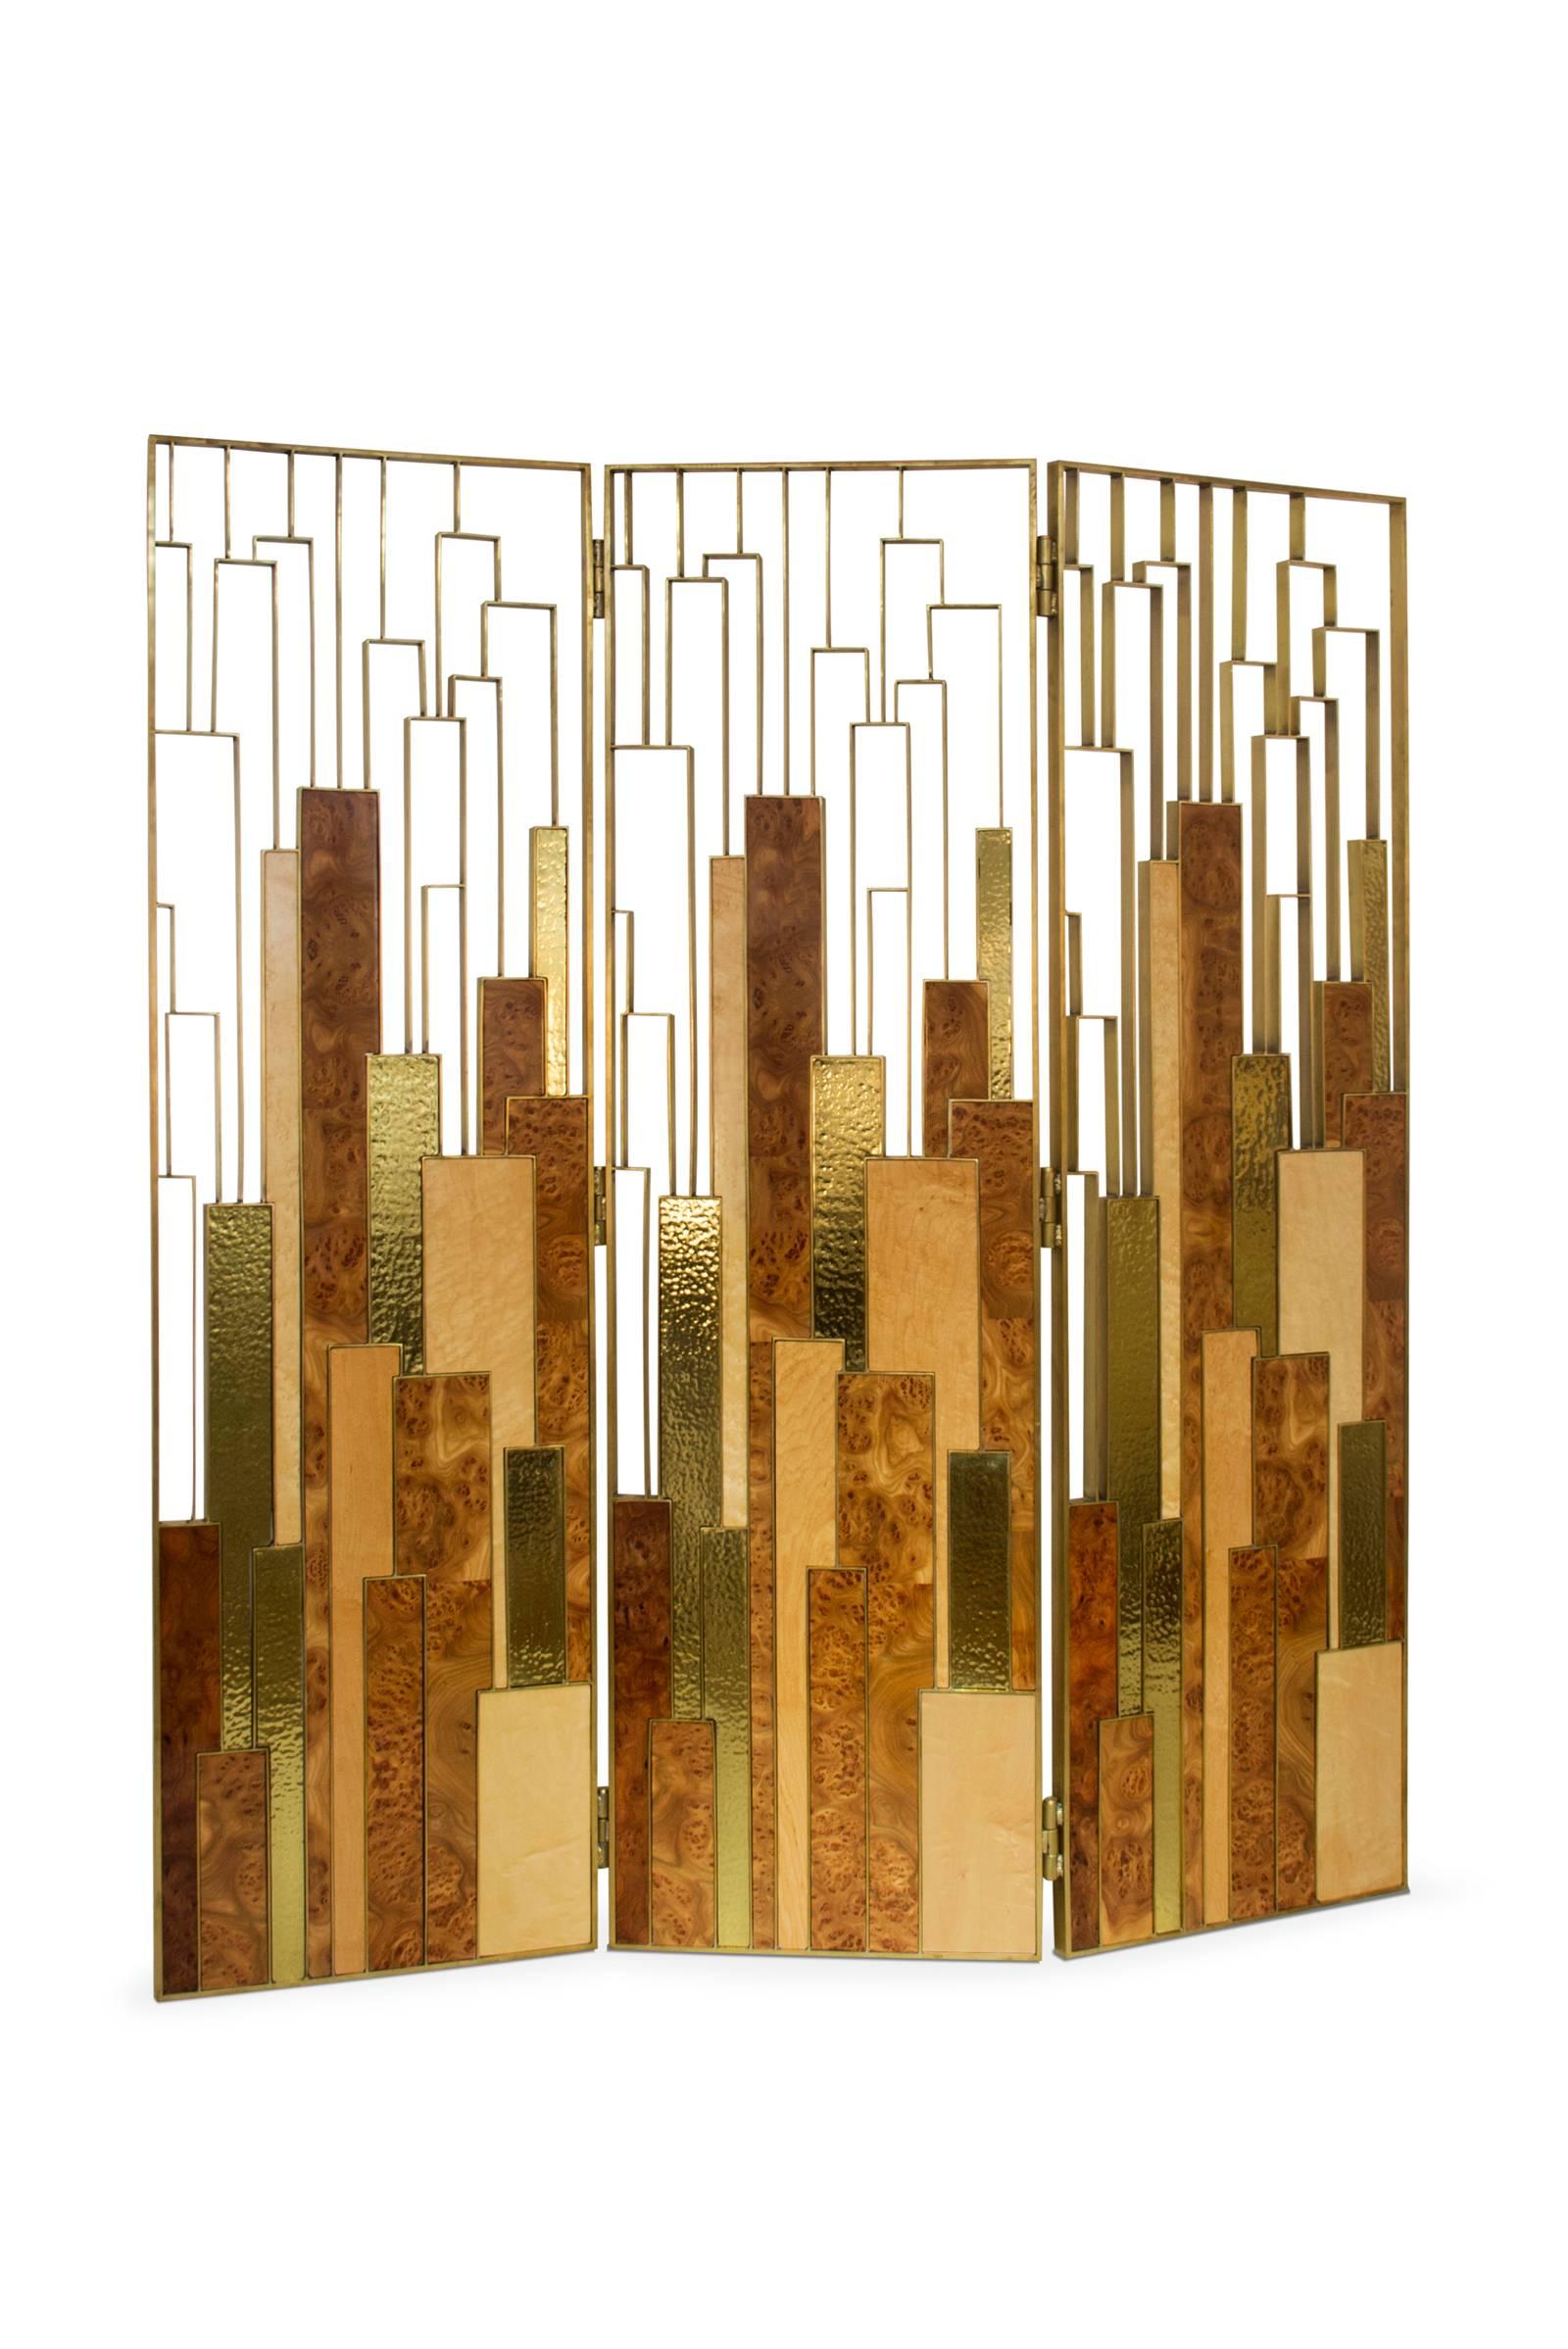 Screen gold elm root with polished brass structure
and panels in bird's eye wood veneer and elm root
wood veneer. Panels in polished hammered brass.
Exceptional piece. 
     
     